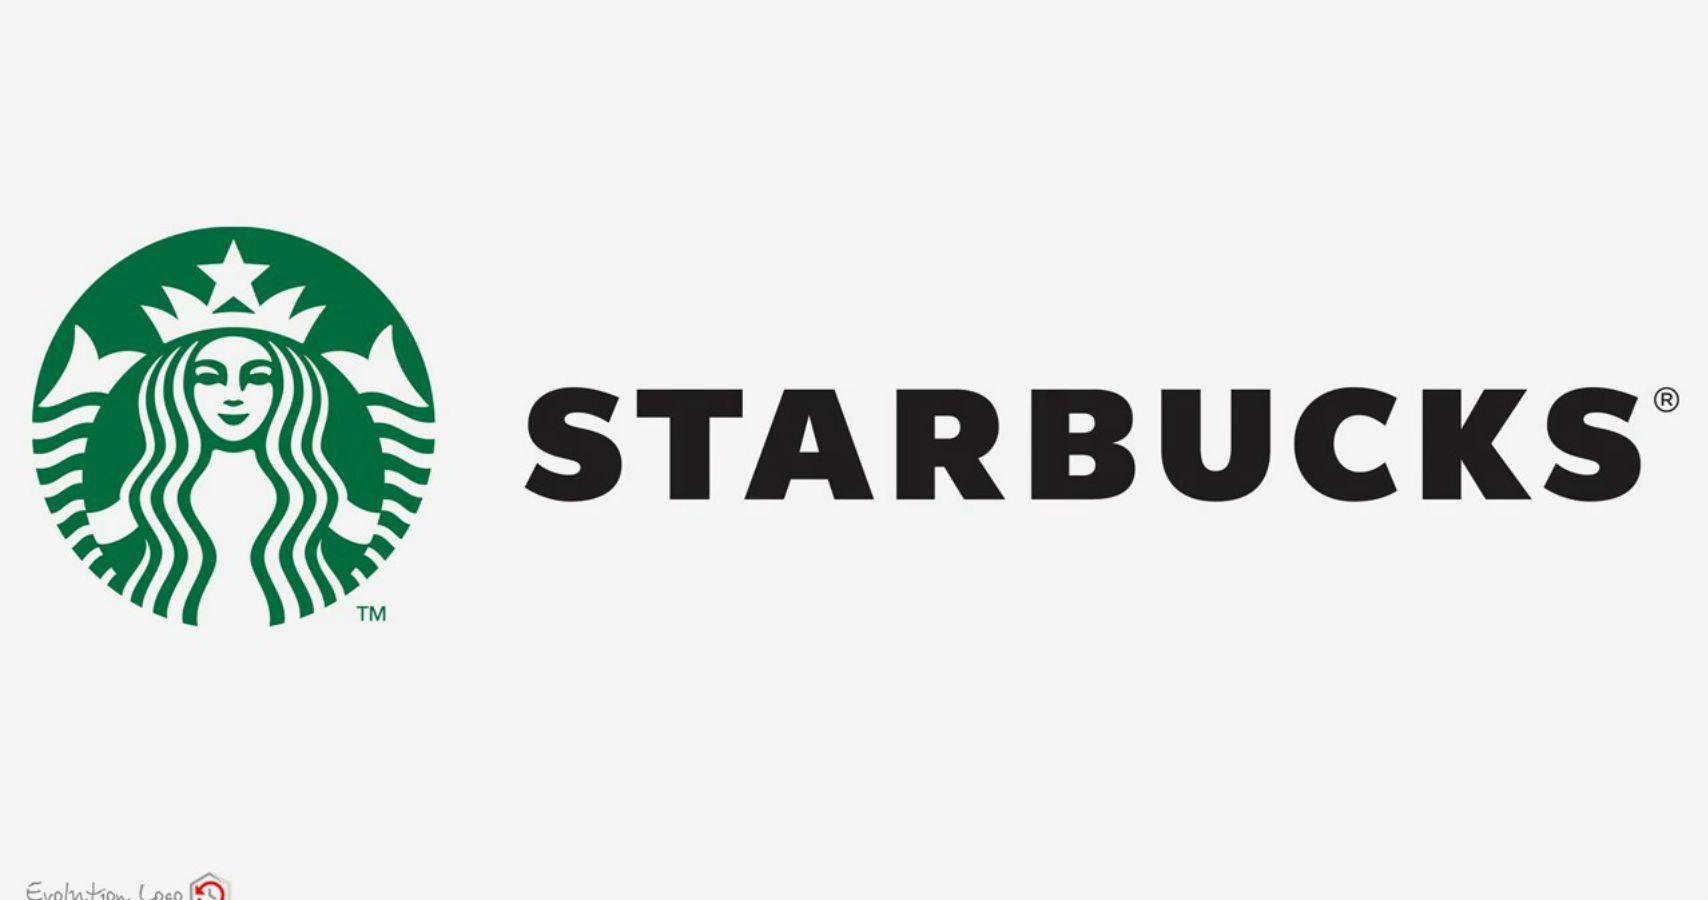 Starbs Logo - Twitter User Points Out The Starbucks Mermaid Is Moving Ever Closer